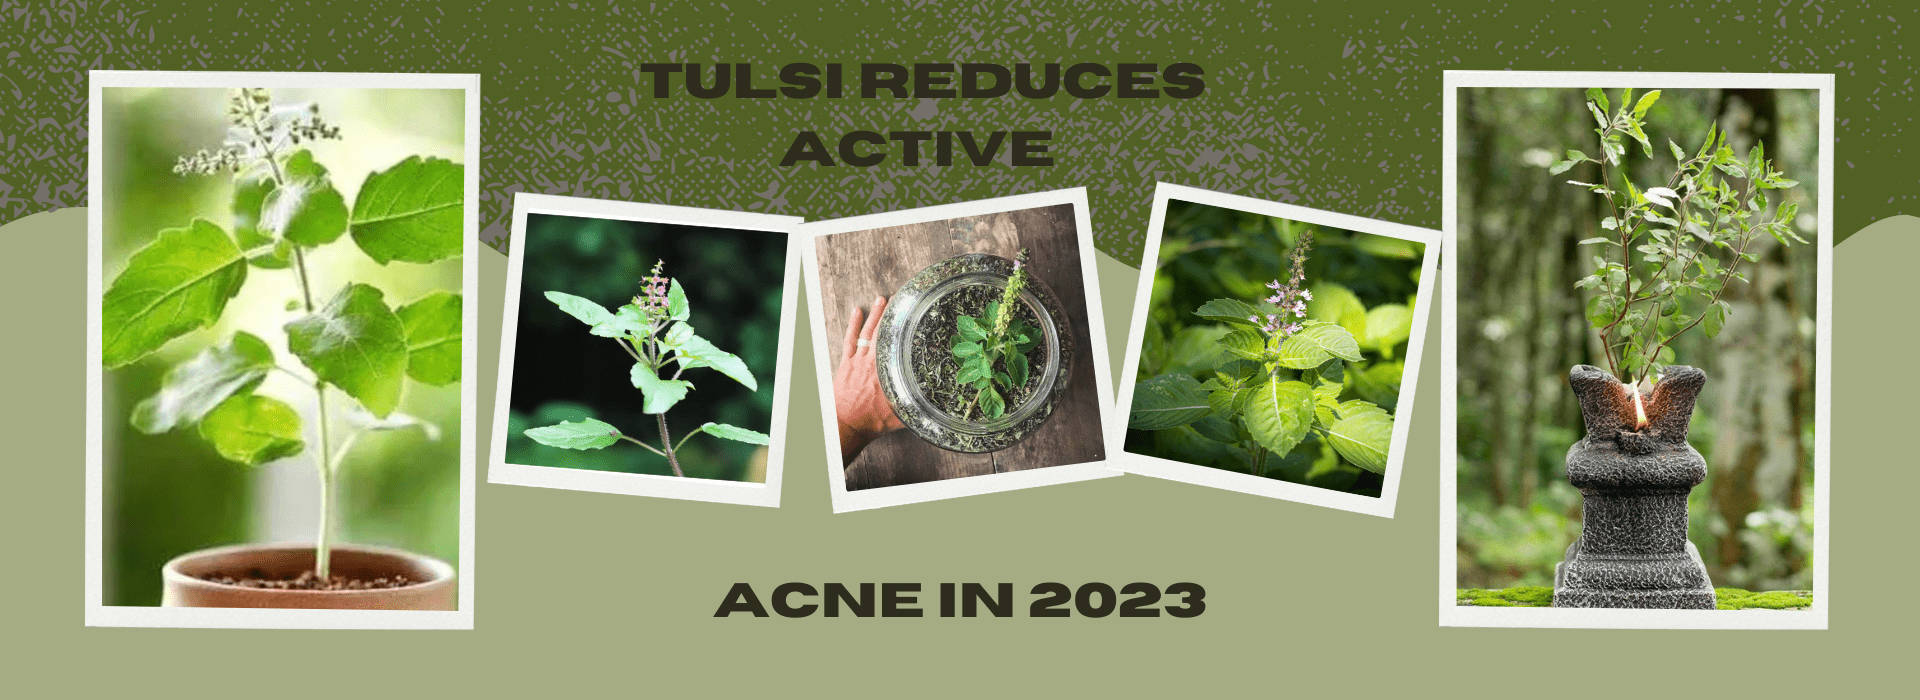 TULSI REDUCES ACTIVE ACNE IN 2023